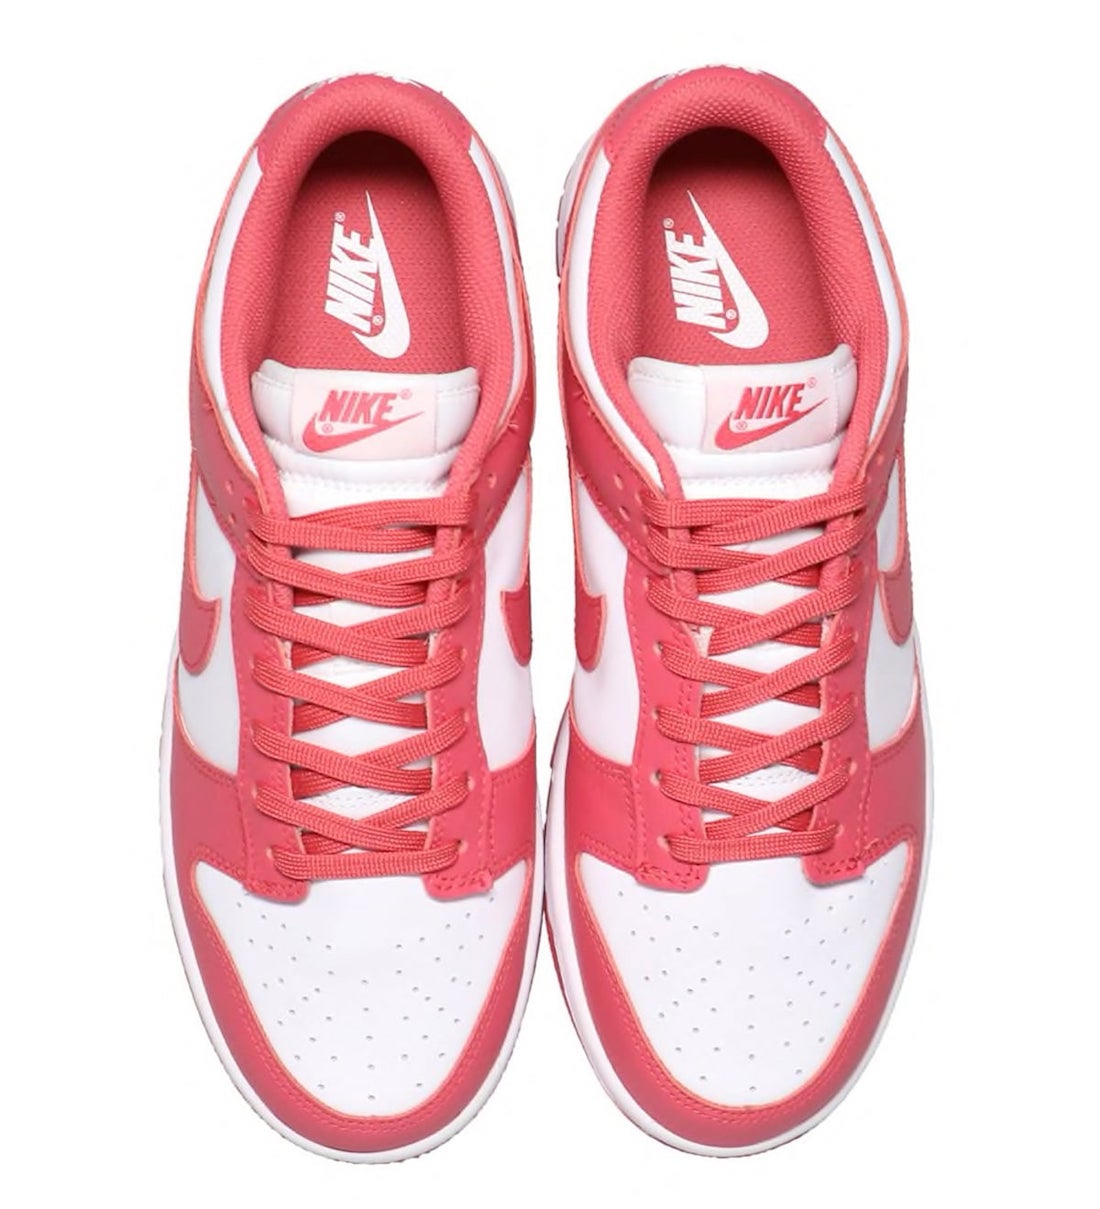 2021 Nike Dunk Low Archeo Pink DD1503 111 Release Date 3